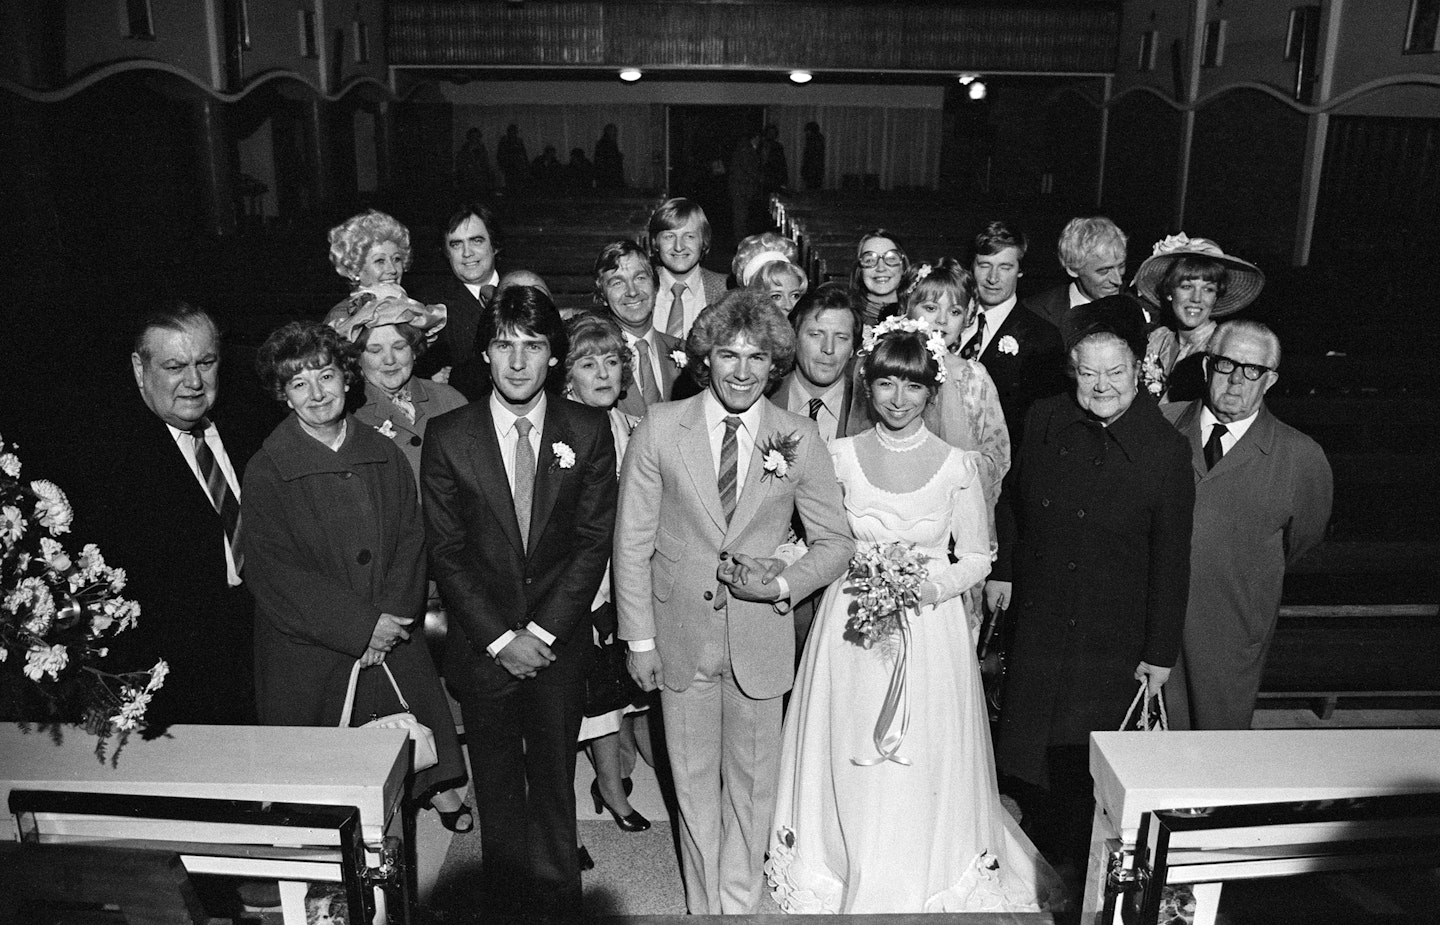 The wedding of Coronation Street's Brian Tilsley and Gail Potter.